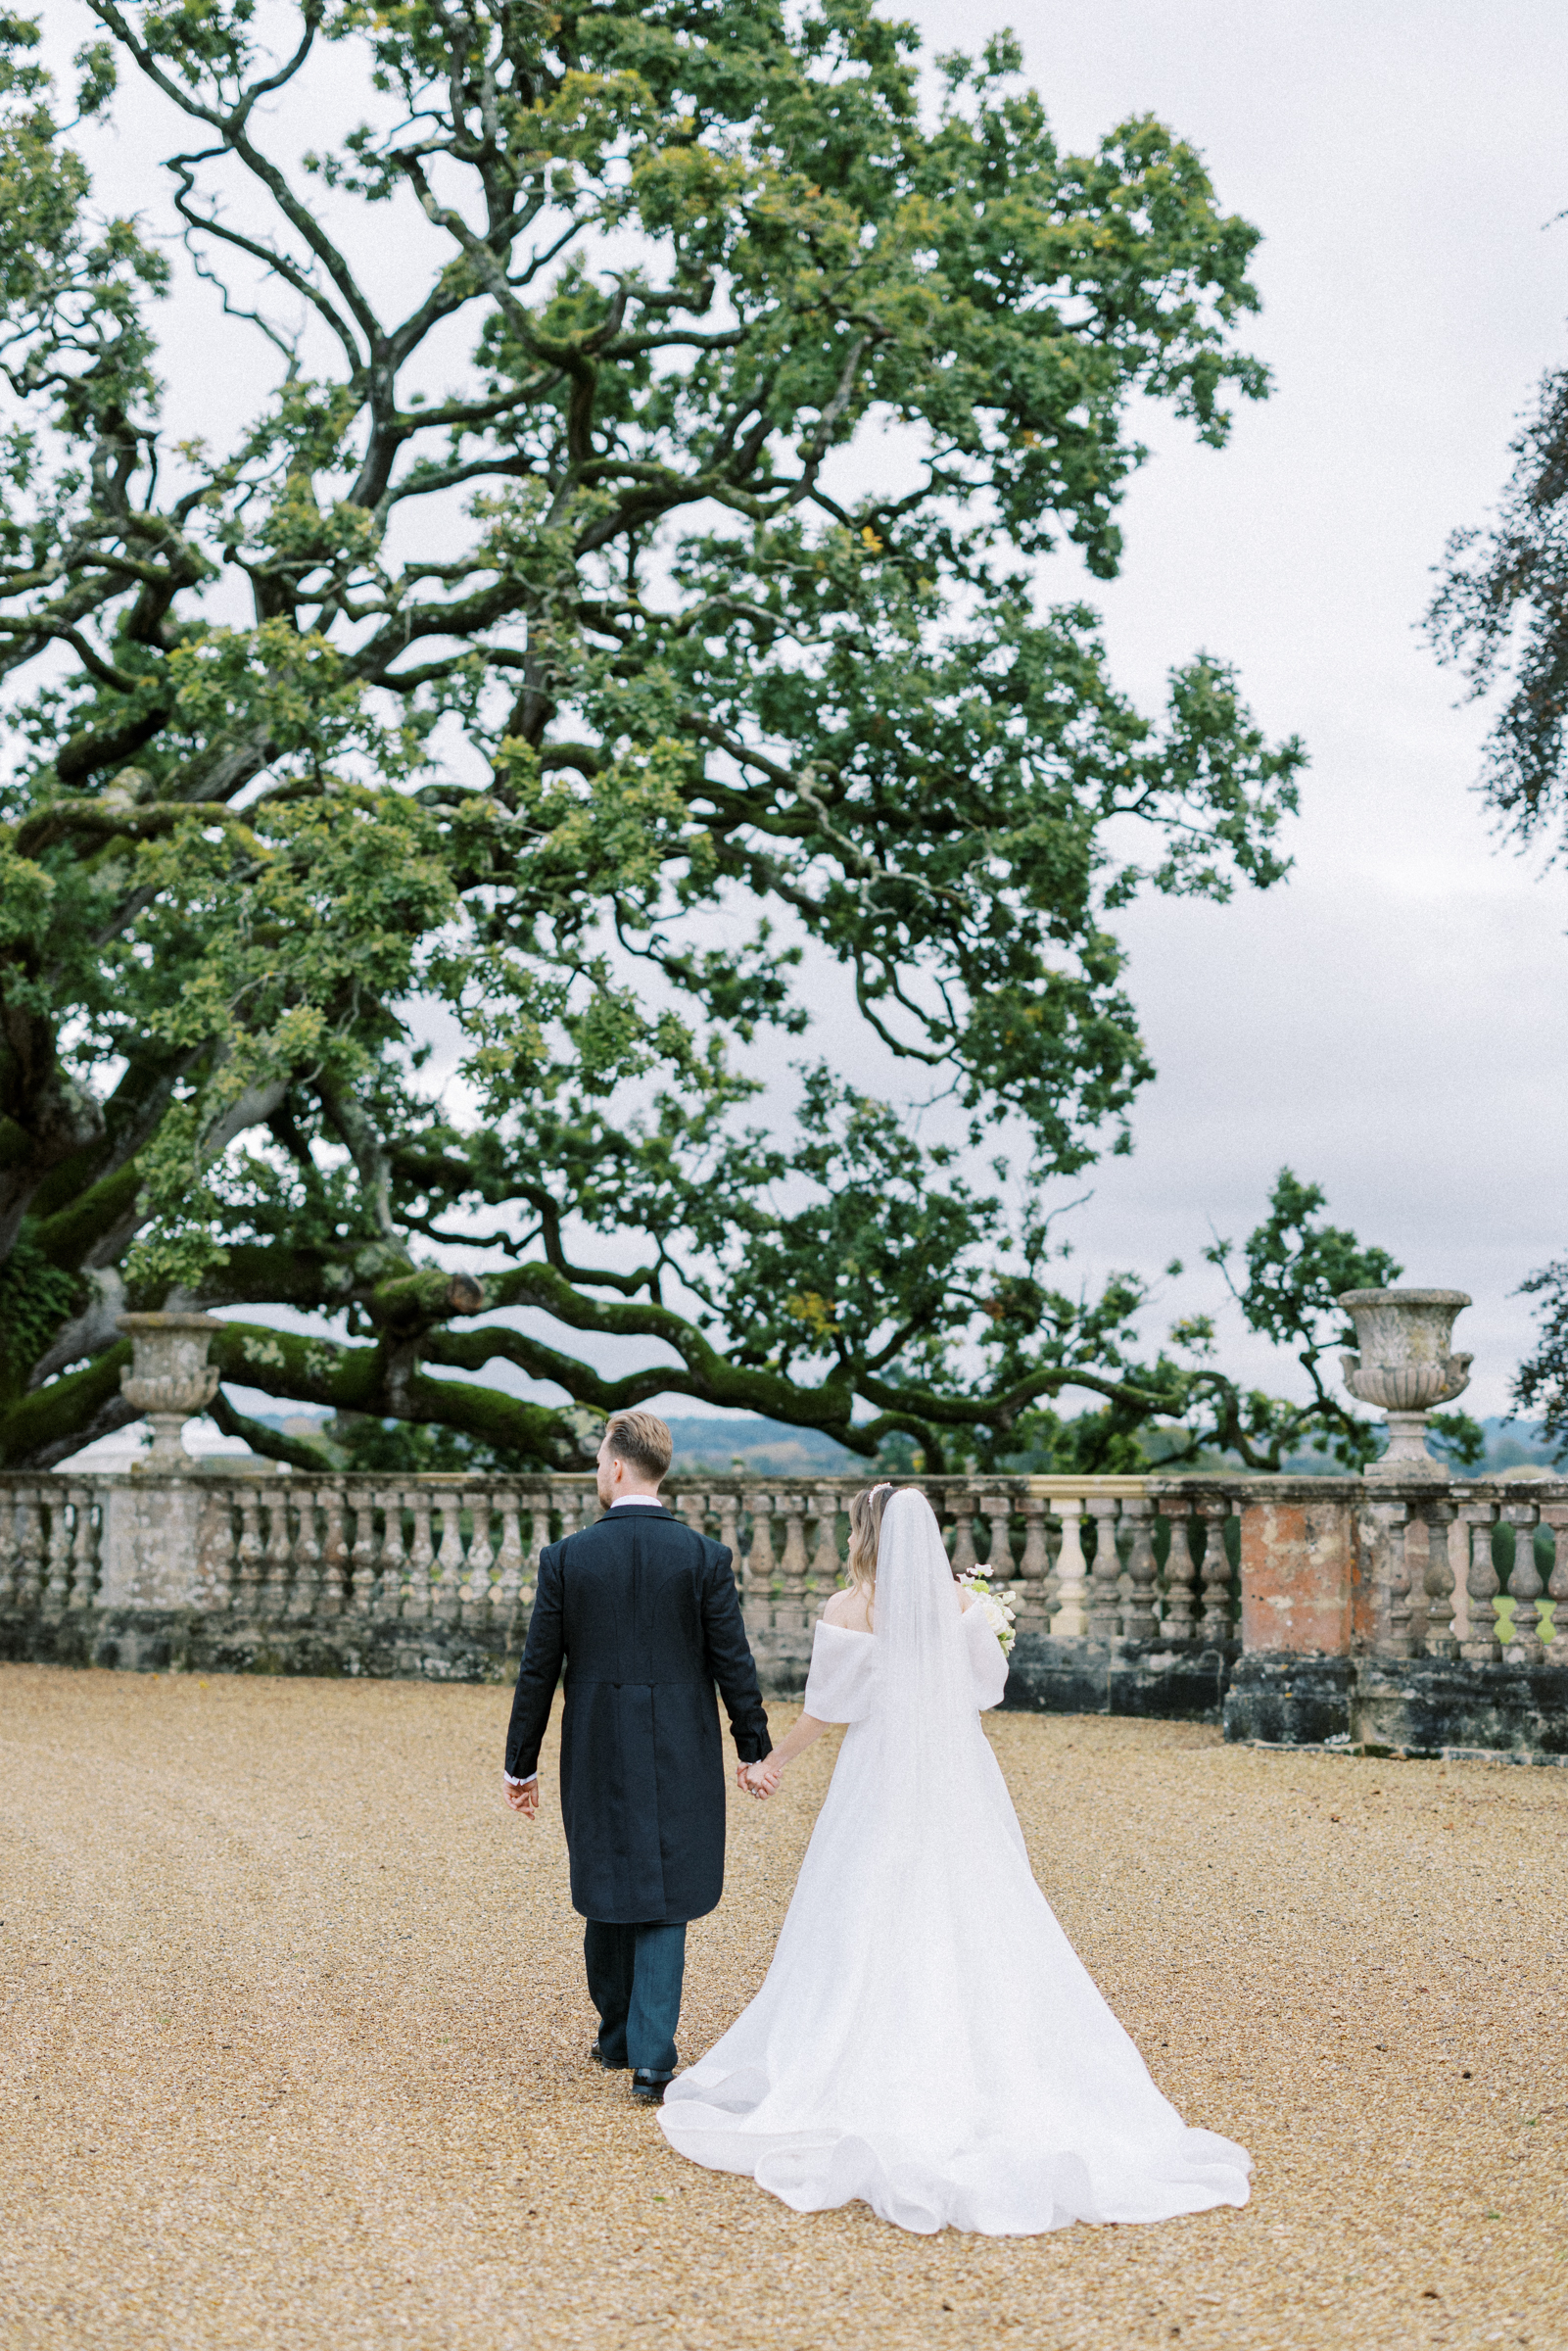 Romantic wedding photography at Somerley House